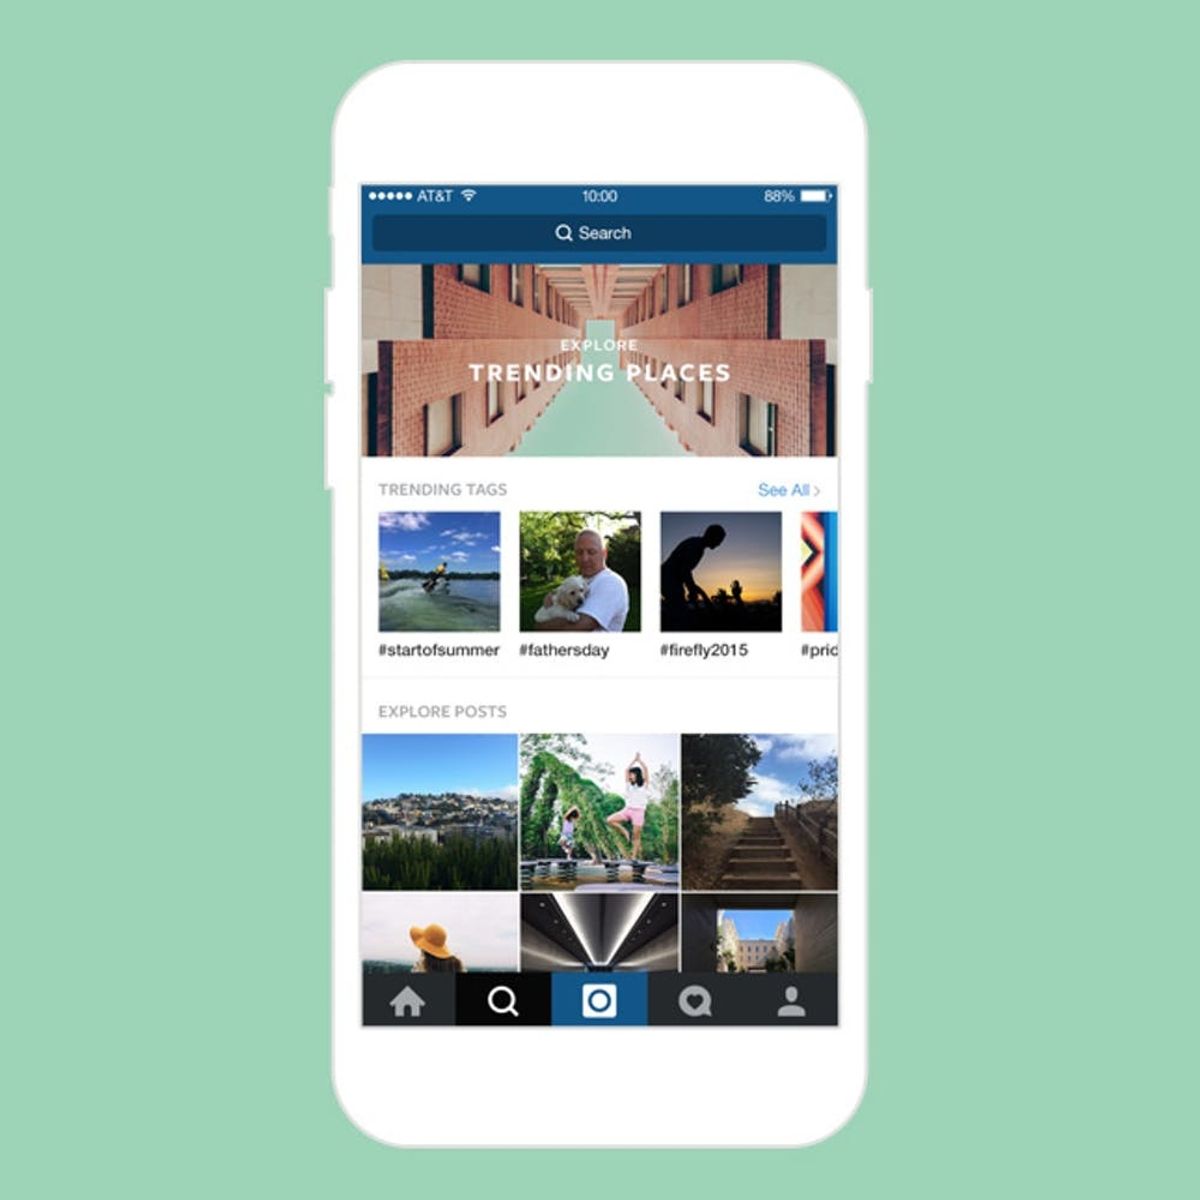 3 New Instagram Features That Will Transform How You Use the App